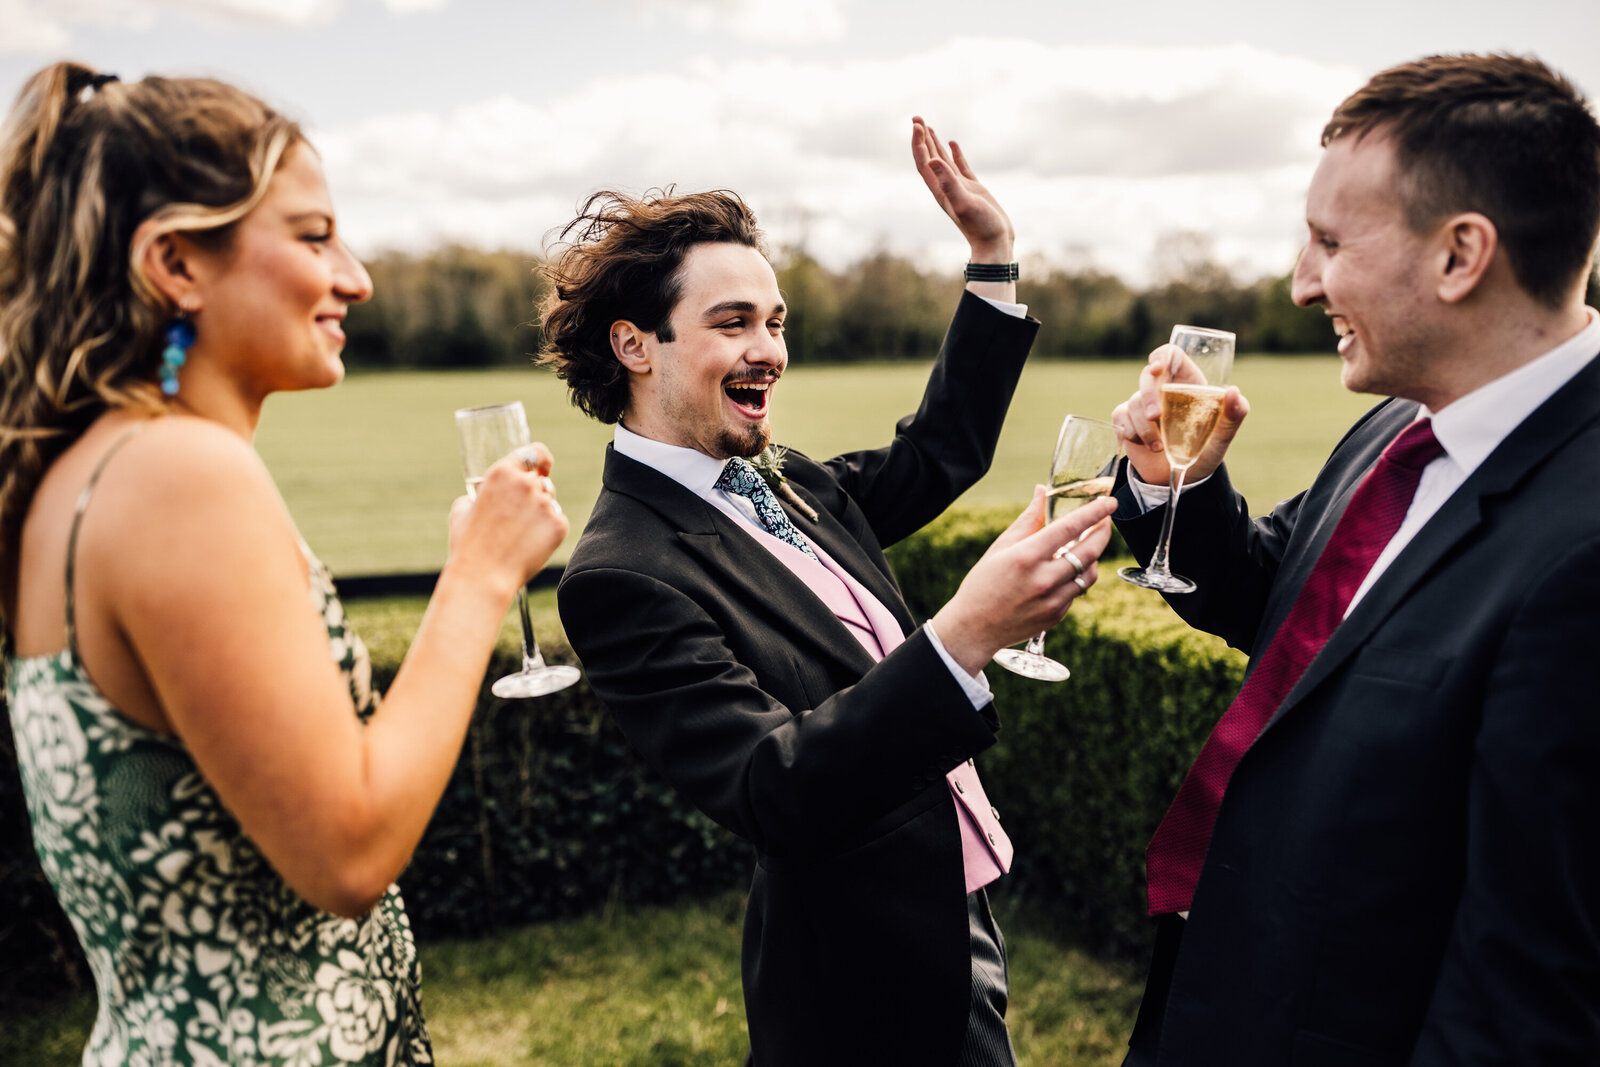 Group of friends celebrating with champagne at an outdoor London wedding